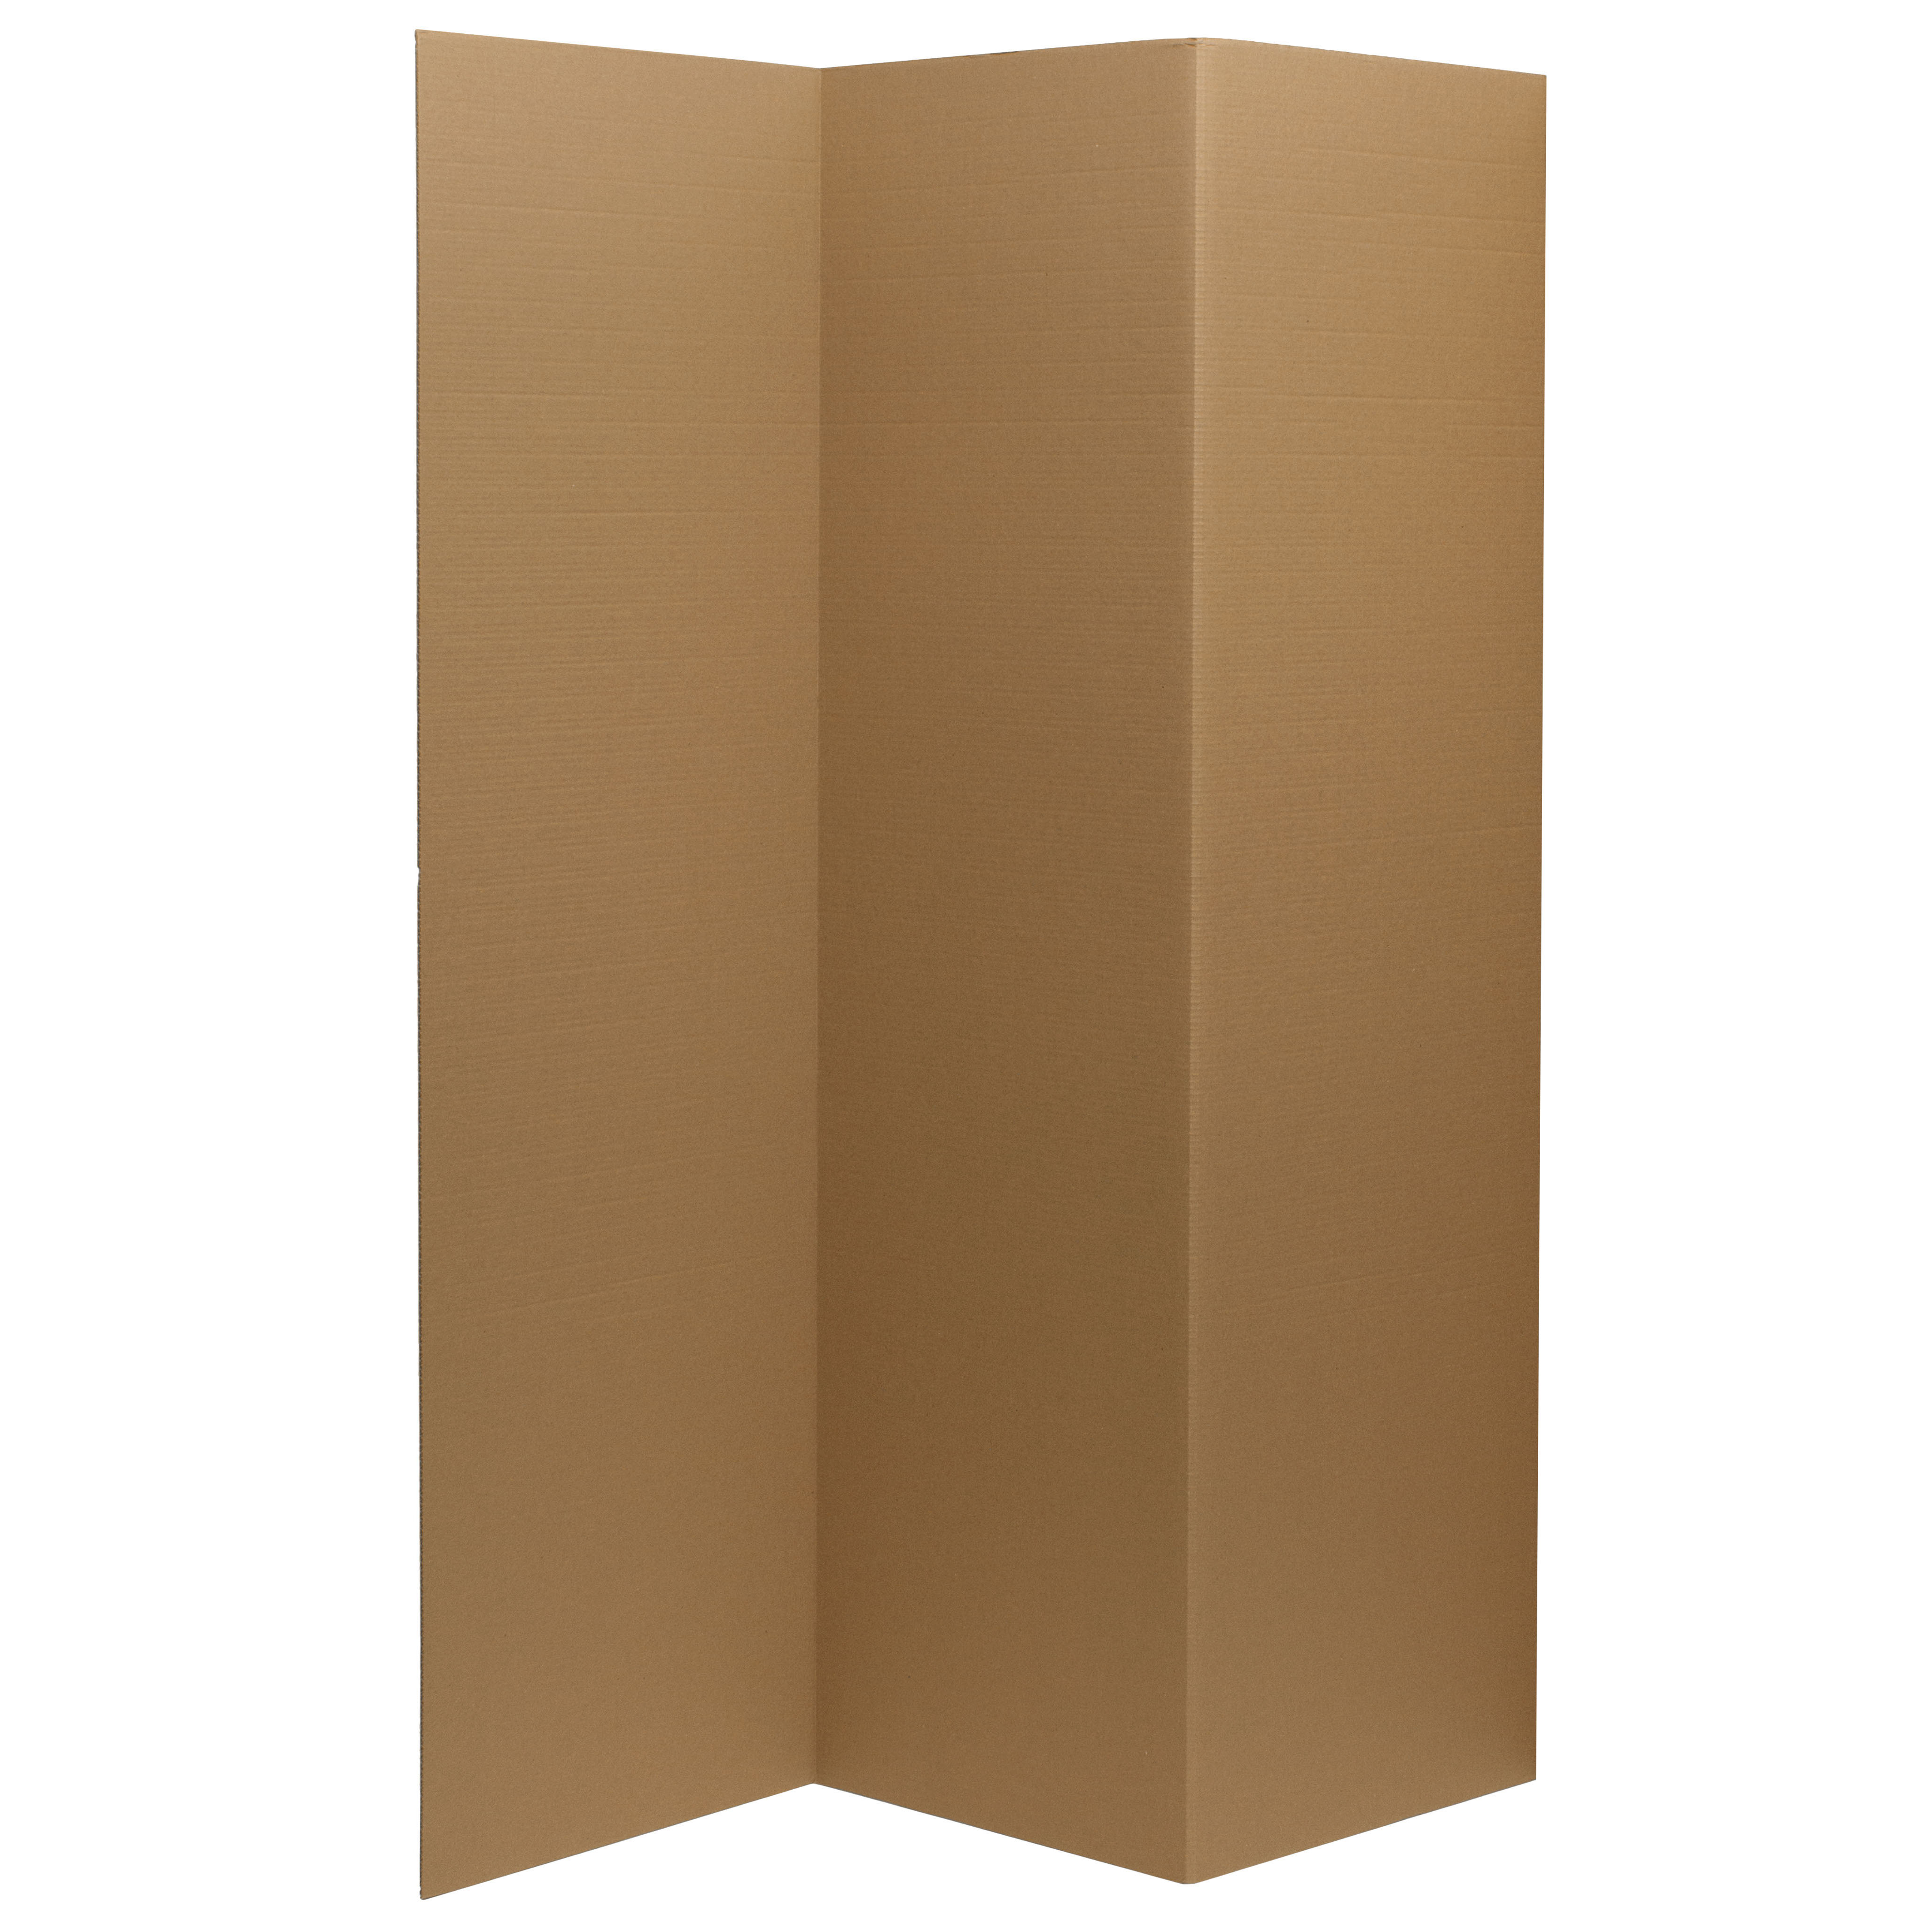 Buy 6 ft. Tall Brown Temporary Cardboard Folding Screen Online